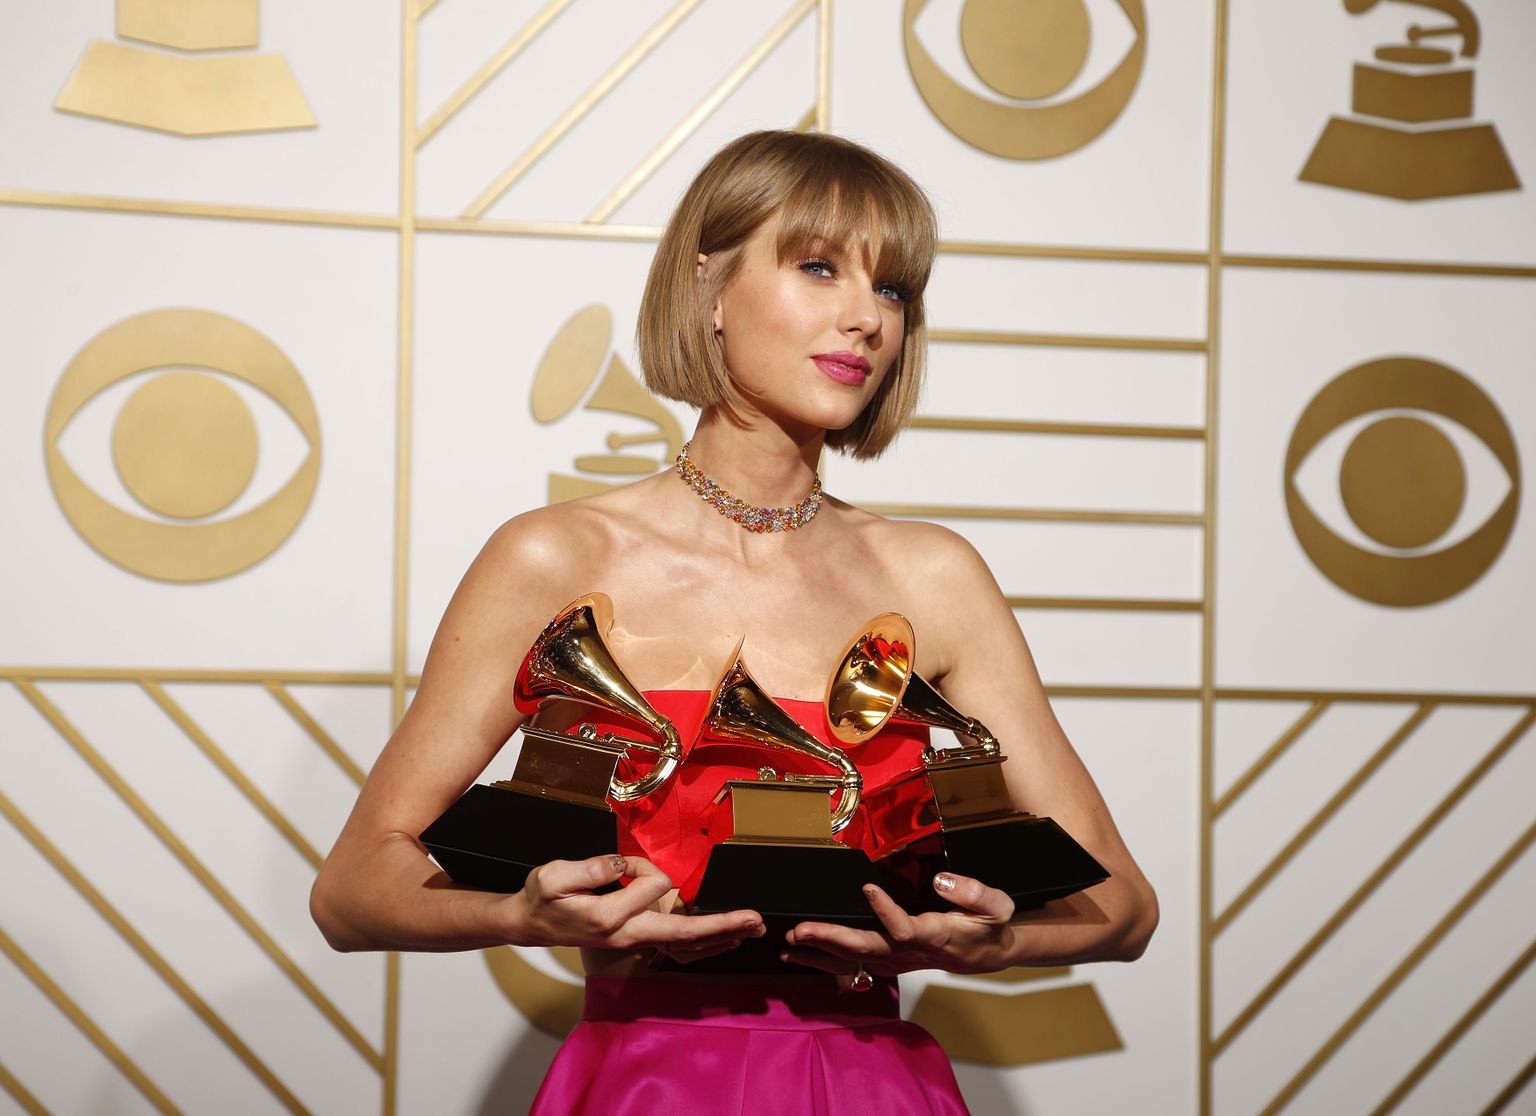 Singer Taylor Swift poses backstage with her awards for Best Music Video for "Bad Blood", Album of the Year and Best Pop Vocal Album for "1989" during the 58th Grammy Awards in Los Angeles, California February 15, 2016.  REUTERS/Lucy Nicholson